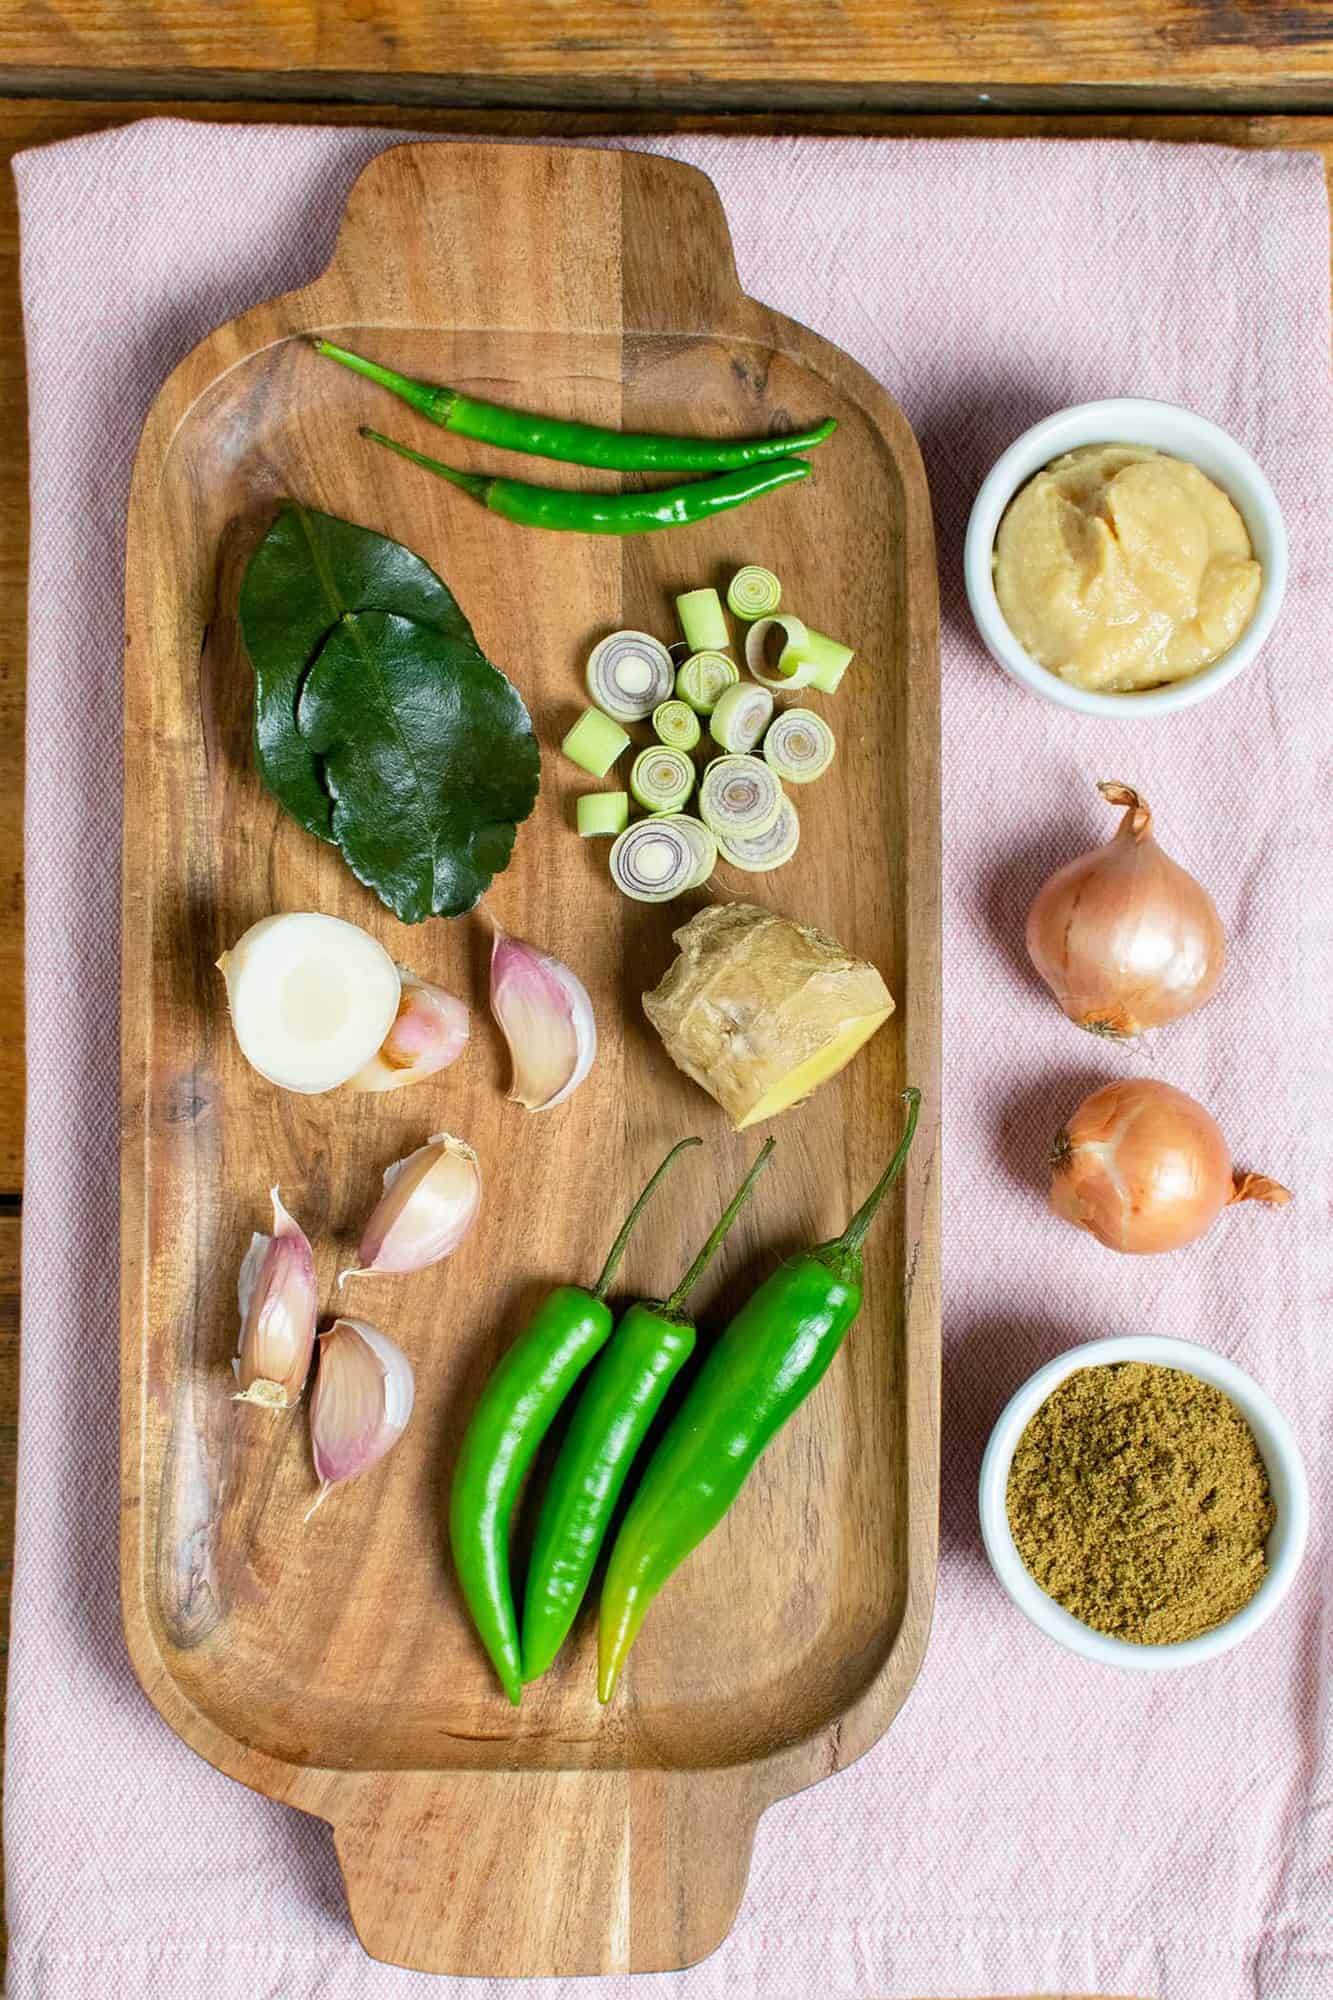 Ingredients for Thai green curry paste set out on a wooden tray